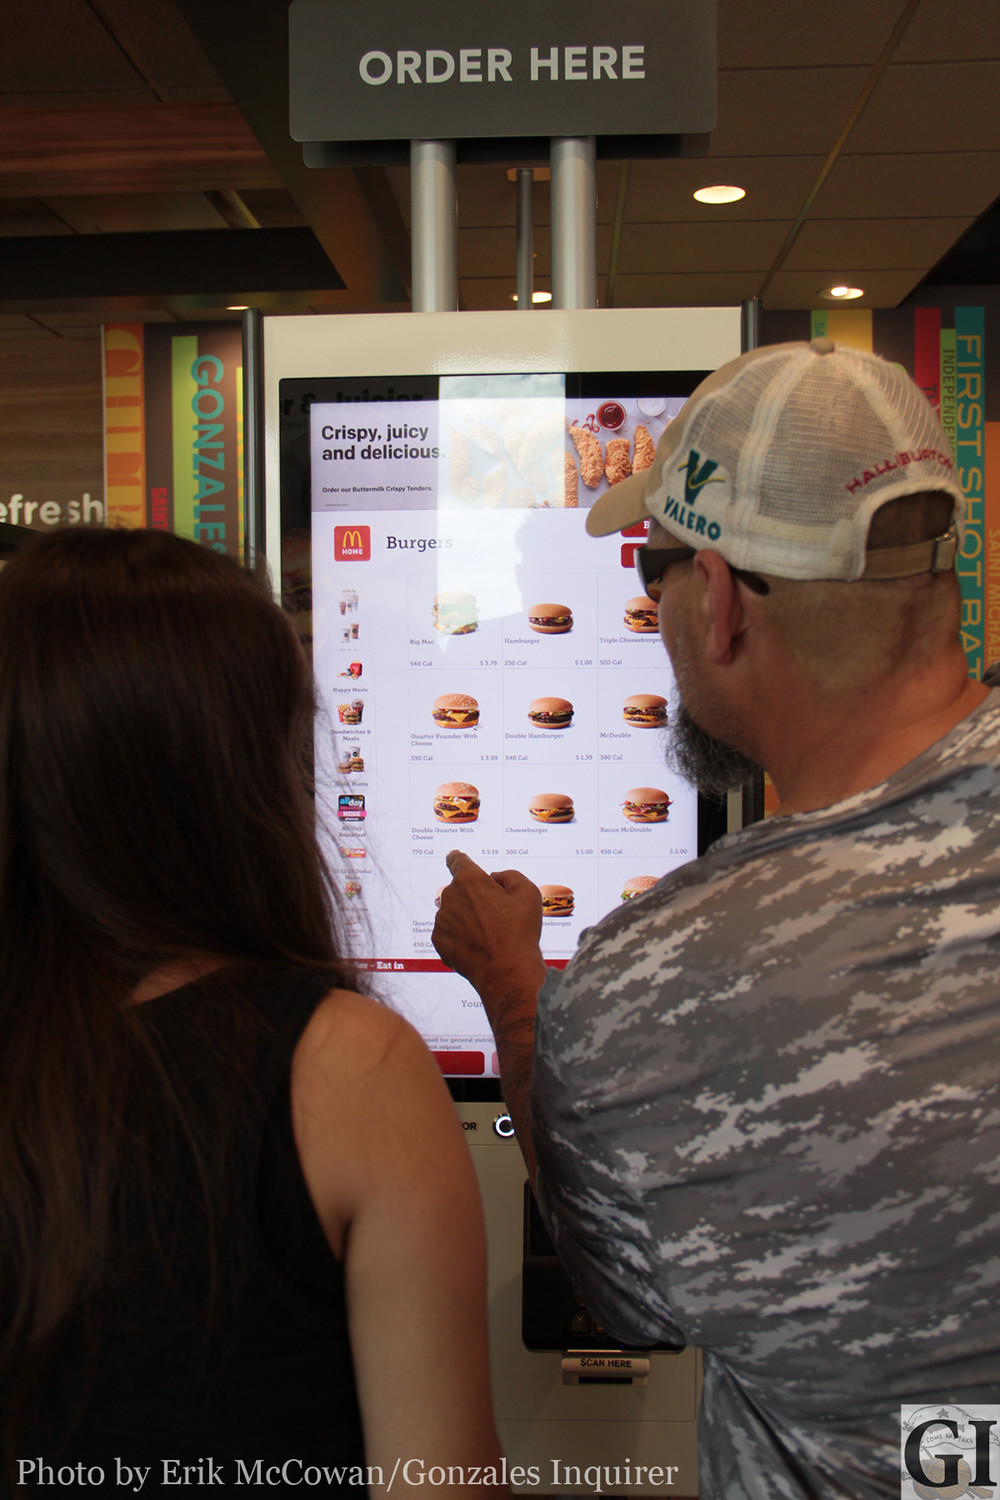 The new interactive menu screen at McDonald's allows customers to select and customize their orders in-store. If you download the restaurant's official app, you can place your order from home.